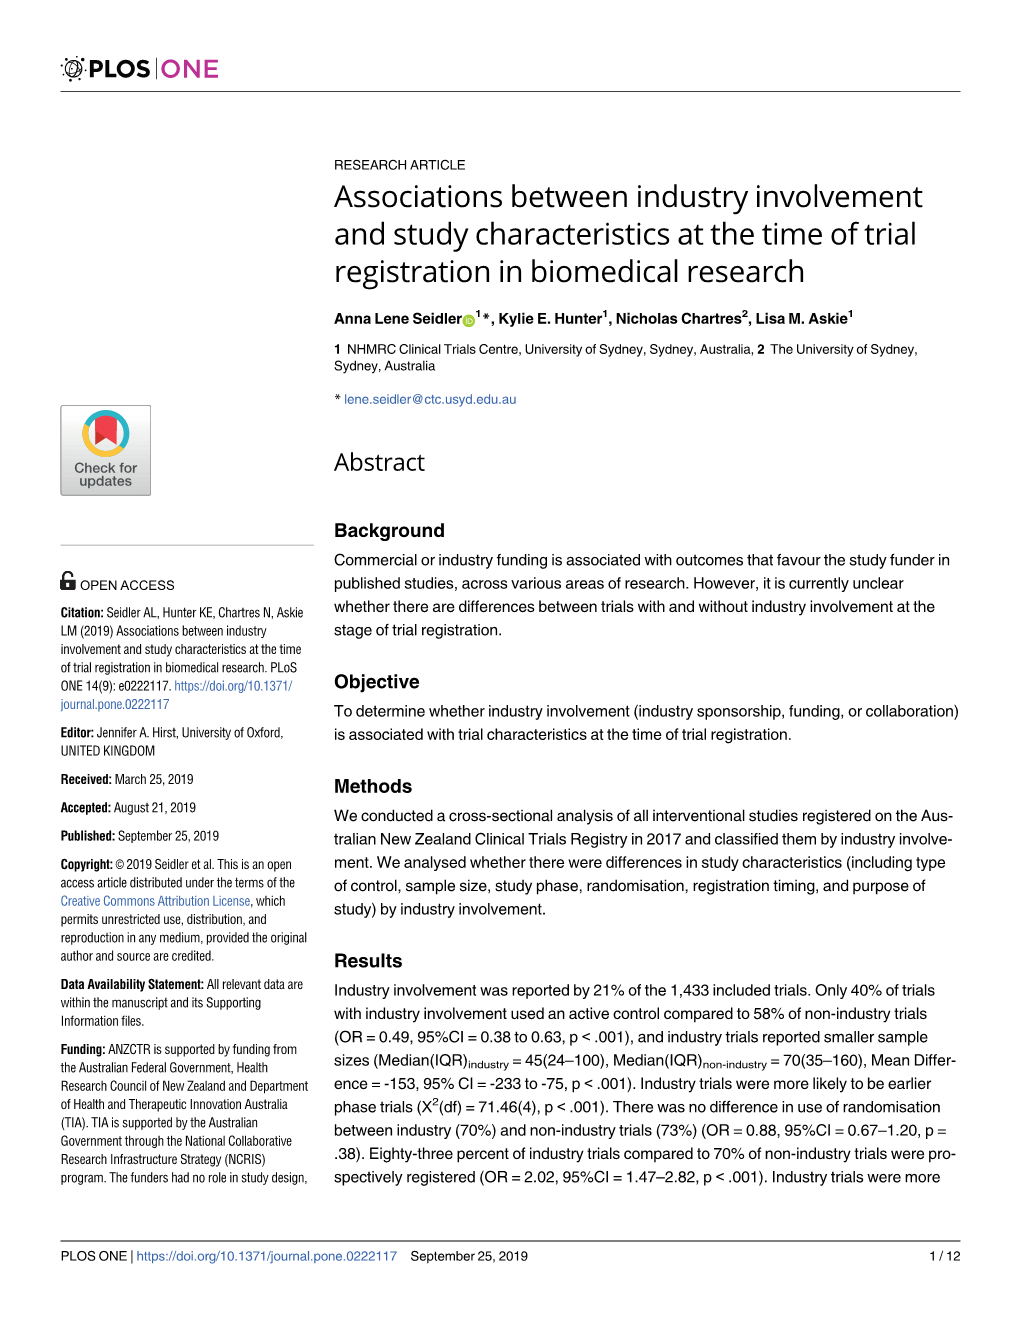 Associations Between Industry Involvement and Study Characteristics at the Time of Trial Registration in Biomedical Research